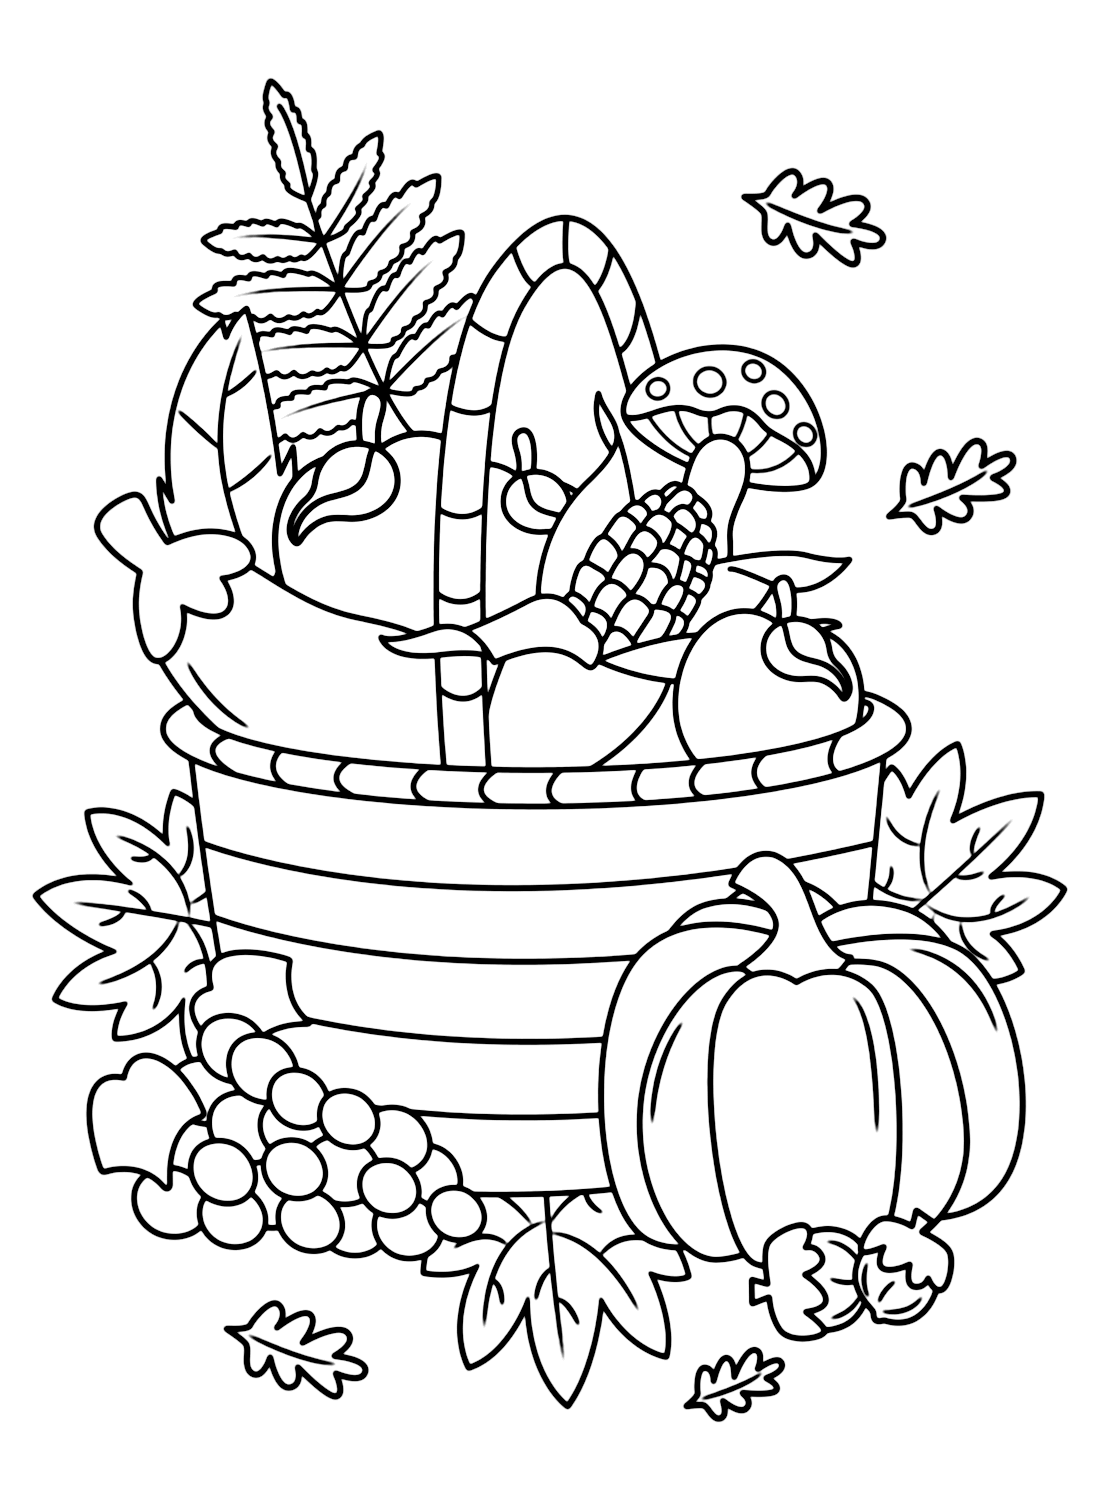 Pumpkin Coloring Pages Free